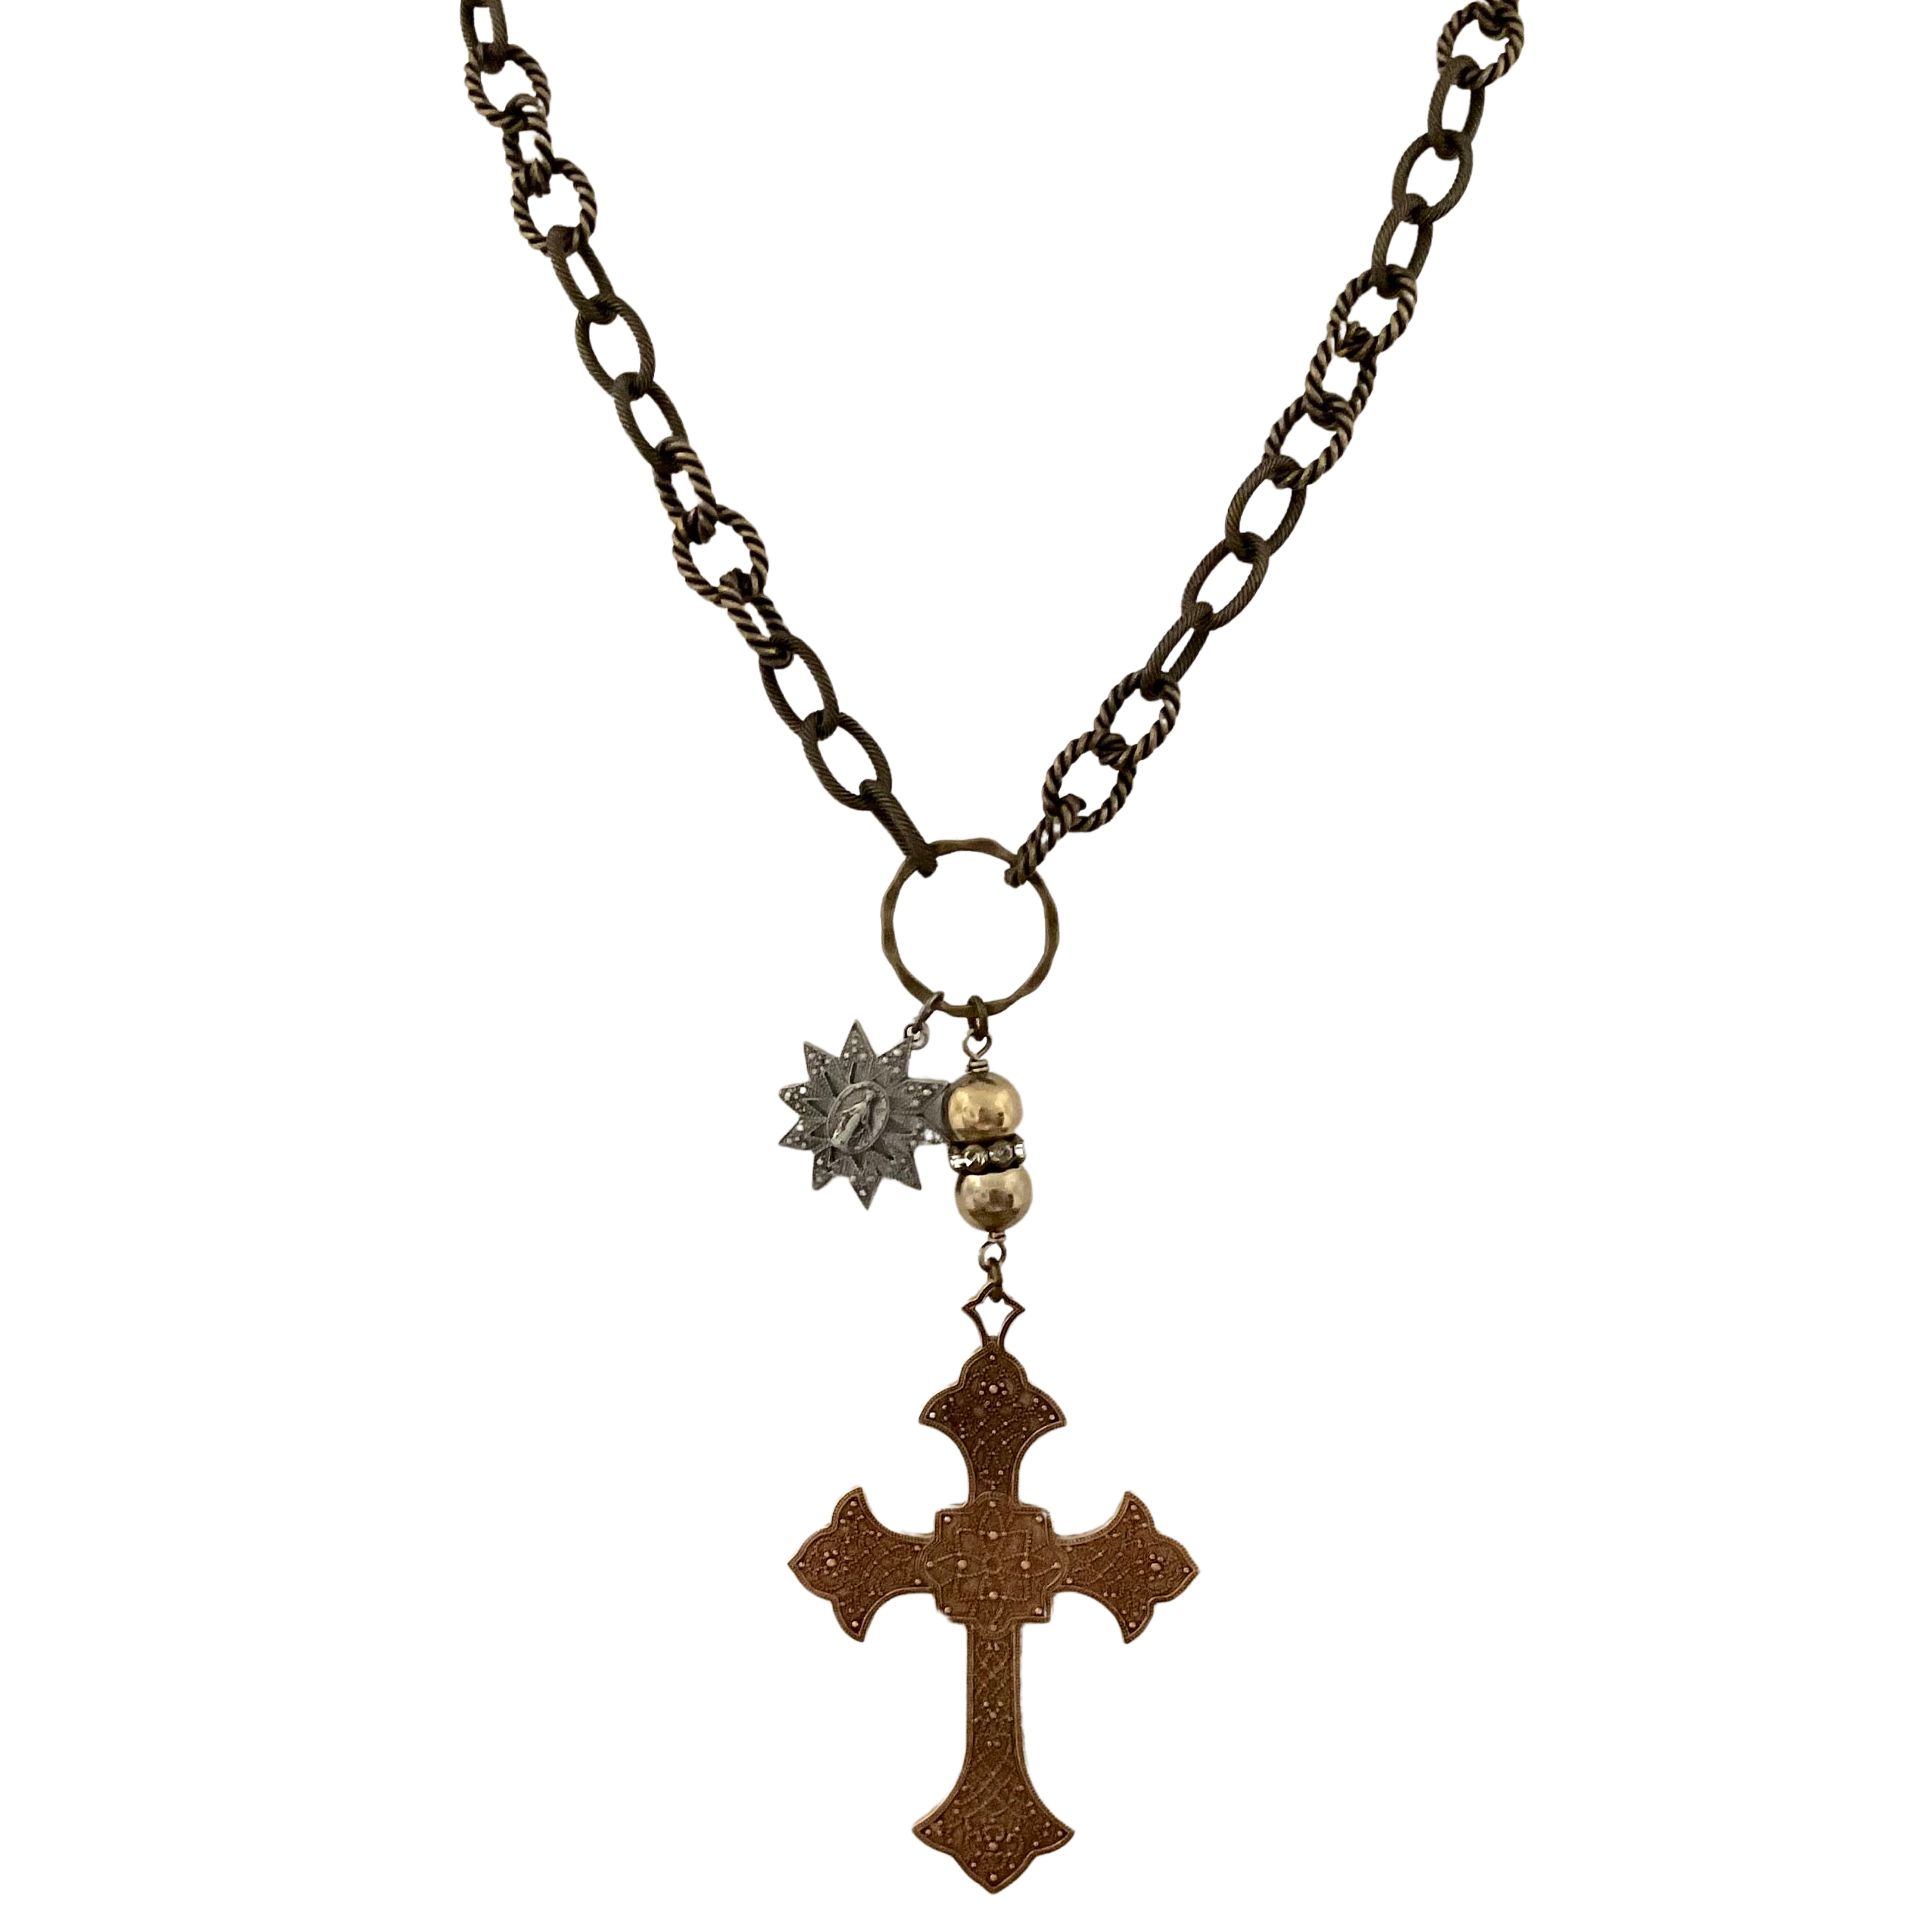 Antique Brass Chain with Religious Medallion & Reproduction Cross 34